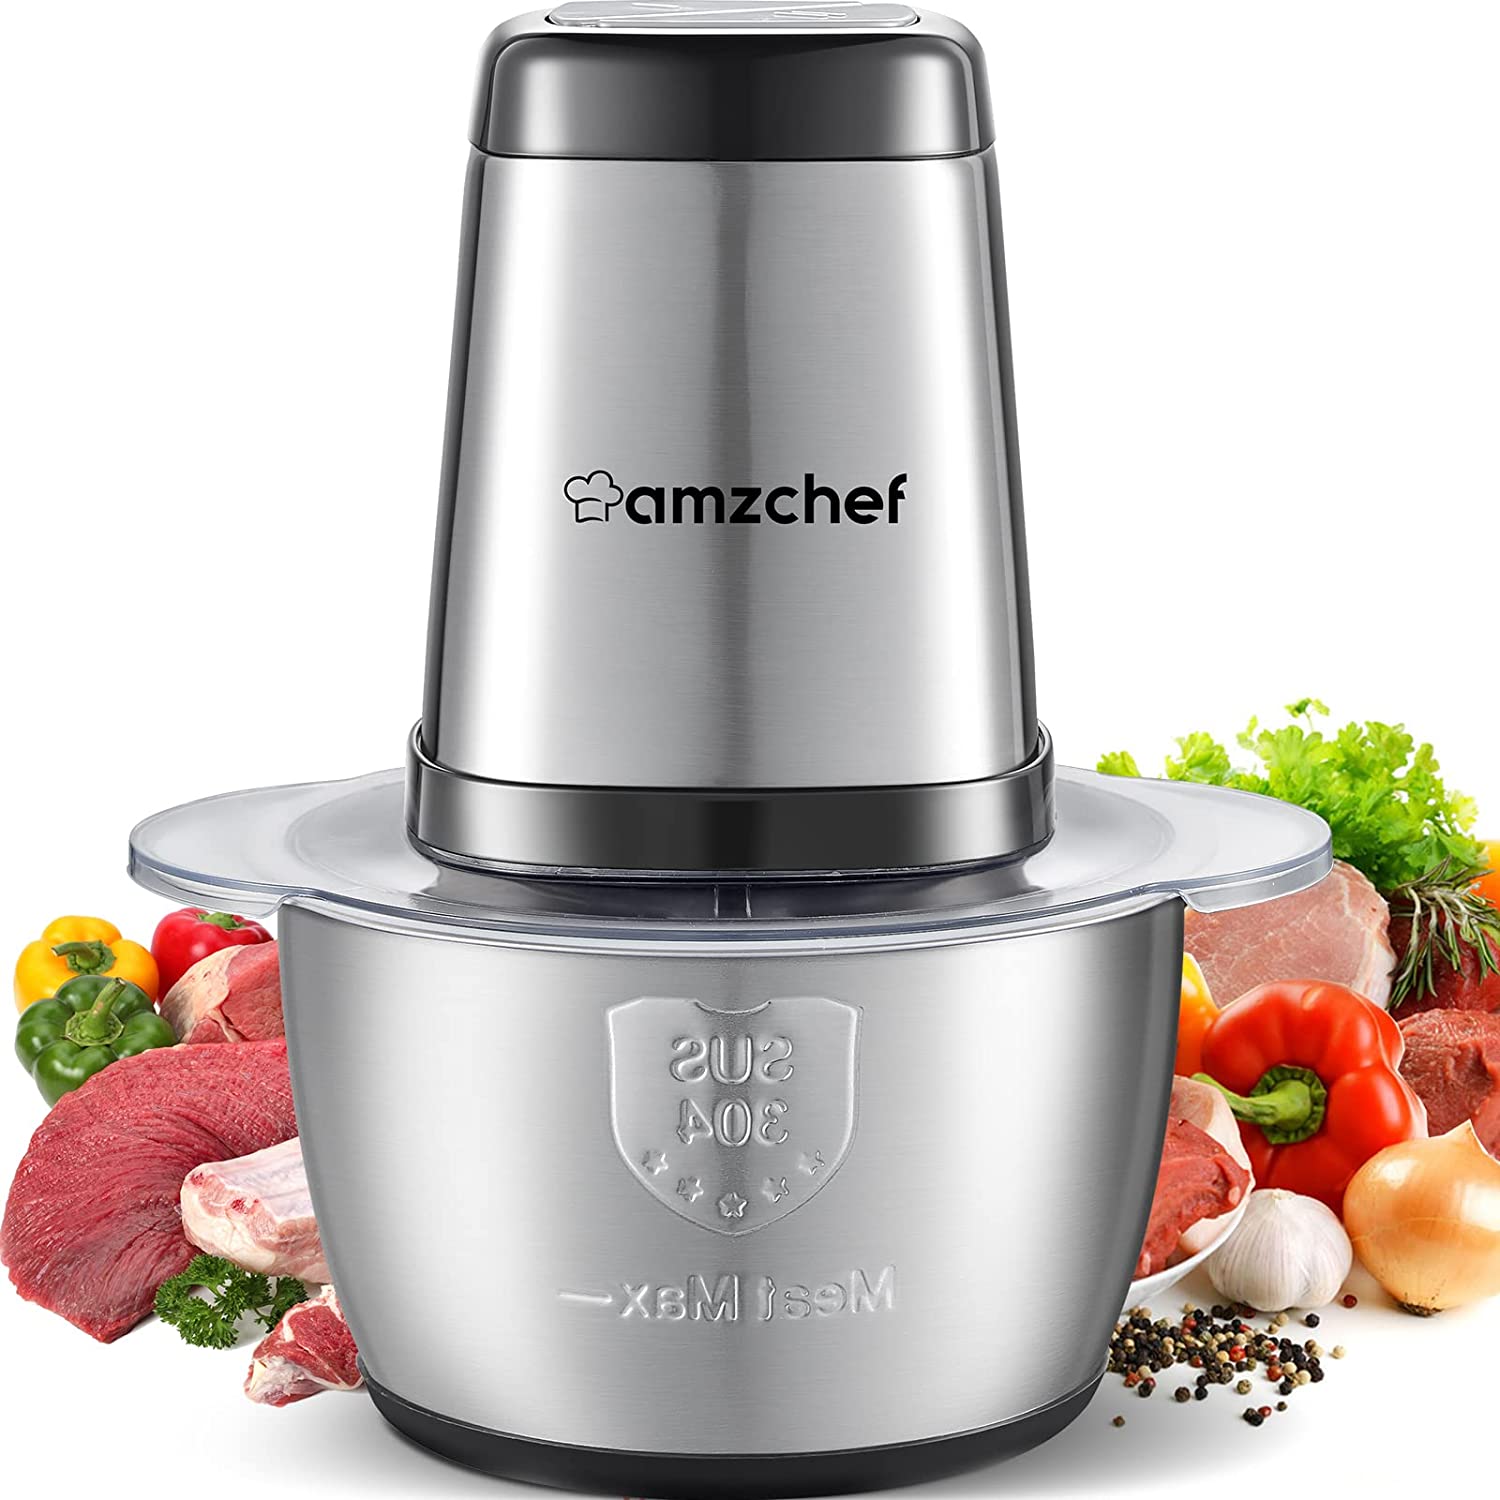 AMZCHEF Electric Kitchen Chopper, 500 W Multi Chopper with 1.5 L Stainless Steel Bowl, 2 Speed Levels, 4 Blades for Meat, Vegetables, Onion, Fruit, Safety Function